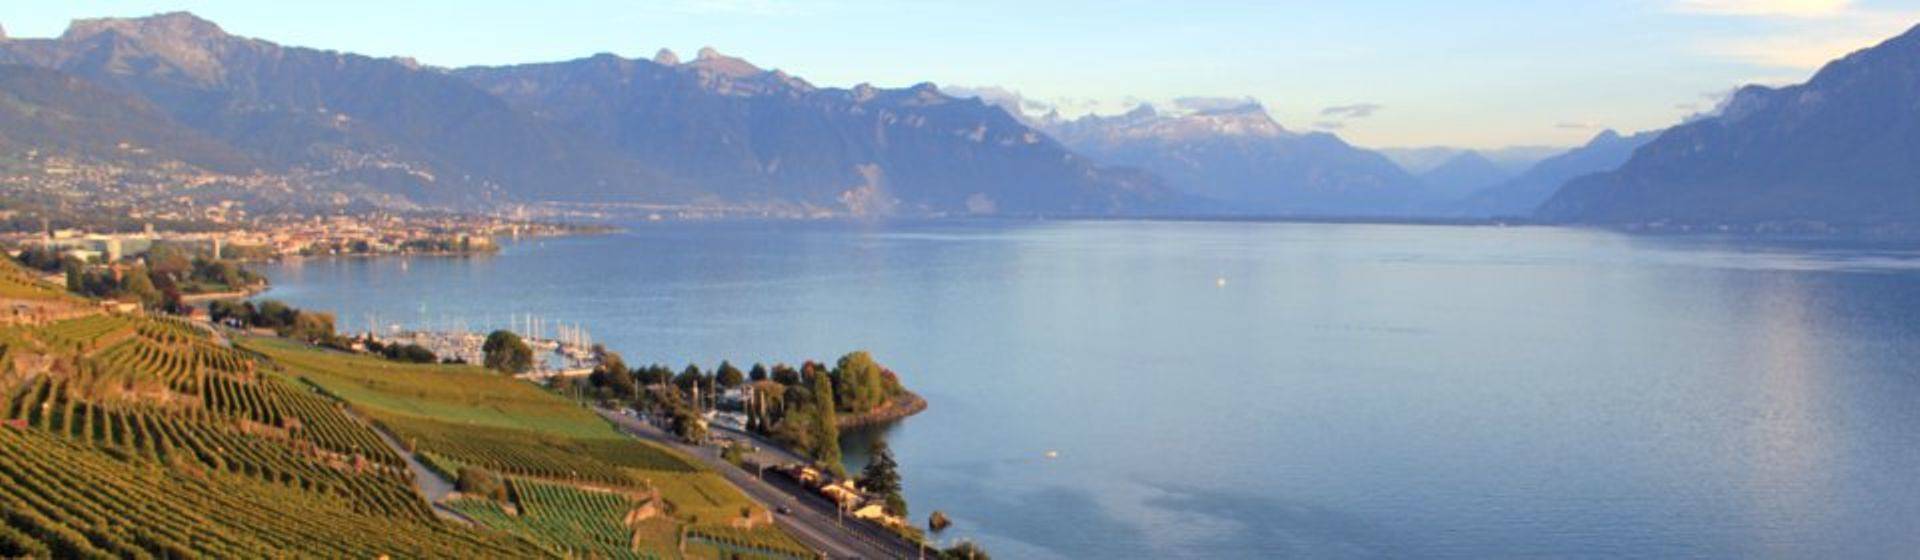 Holidays to Lausanne Image